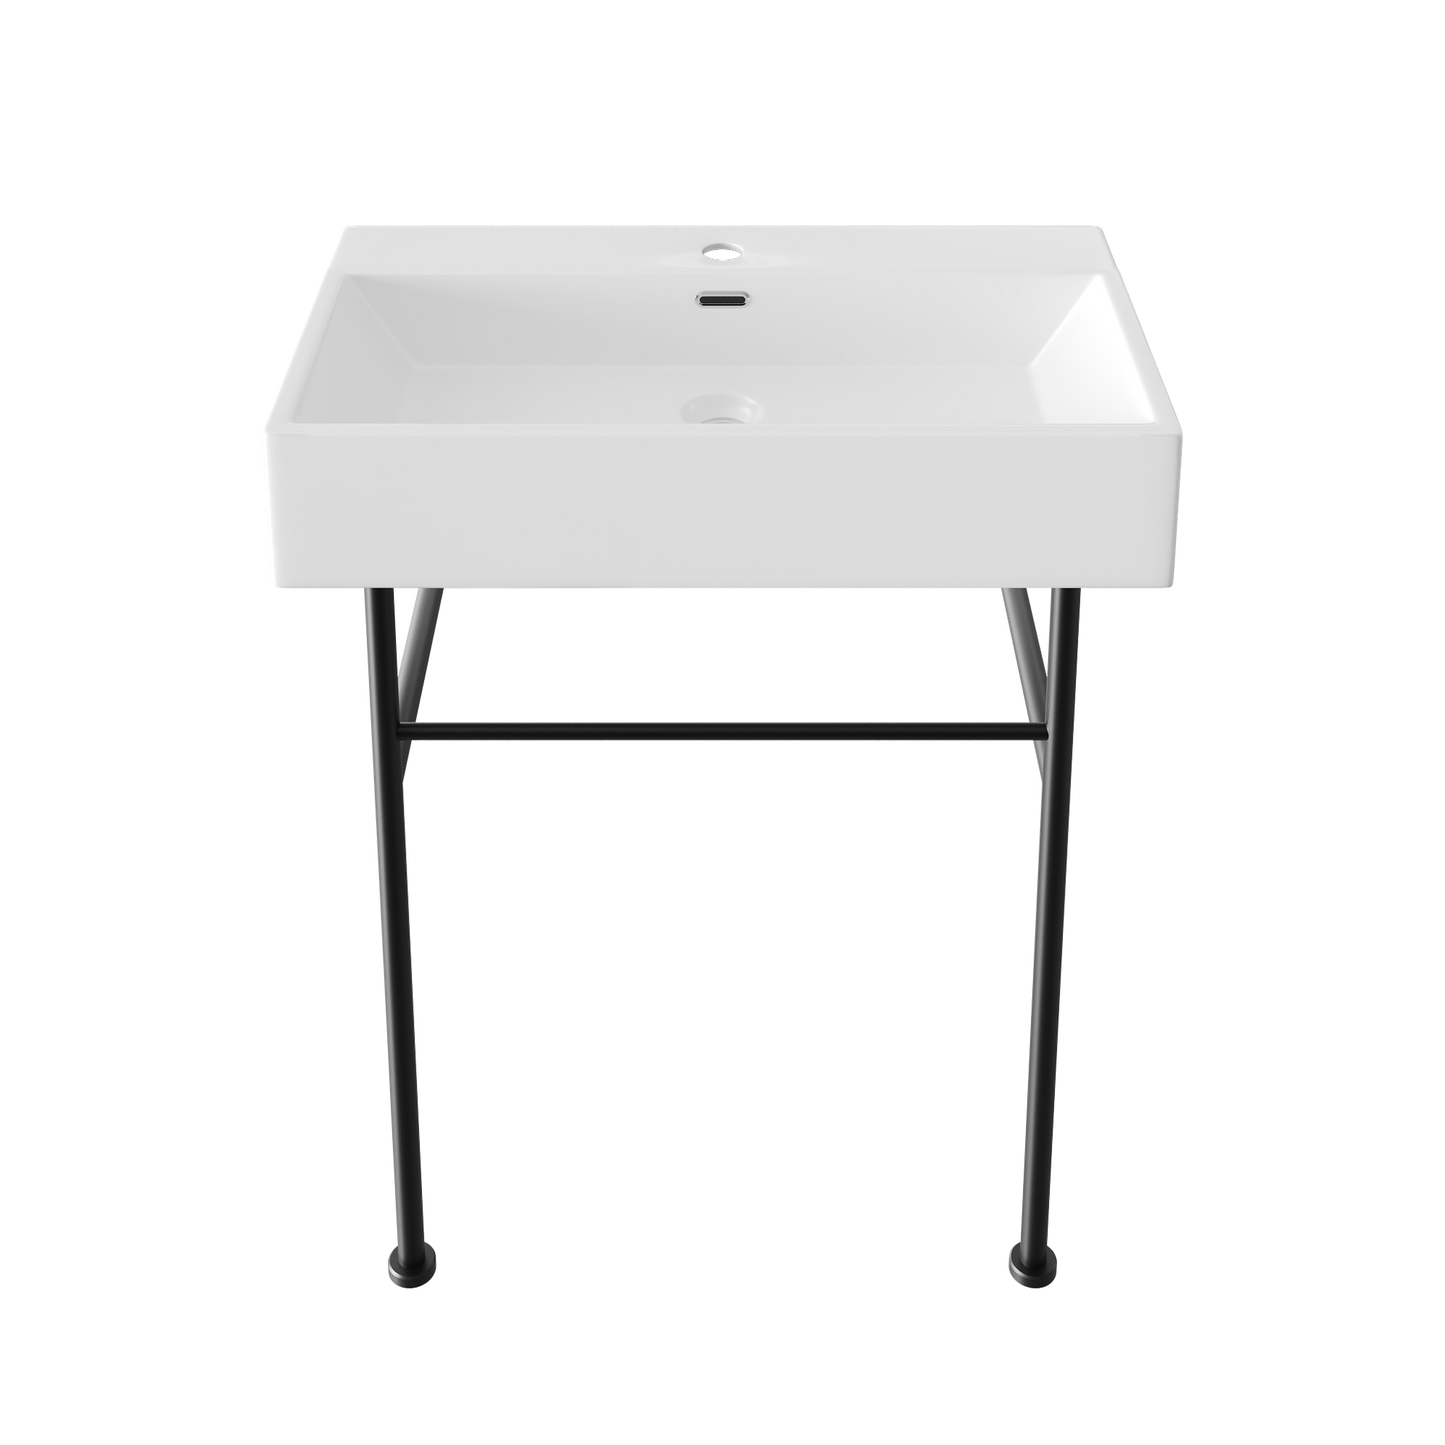 DeerValley 30" Rectangular White Ceramic Console Bathroom Sink With Black Legs and Single Faucet Hole